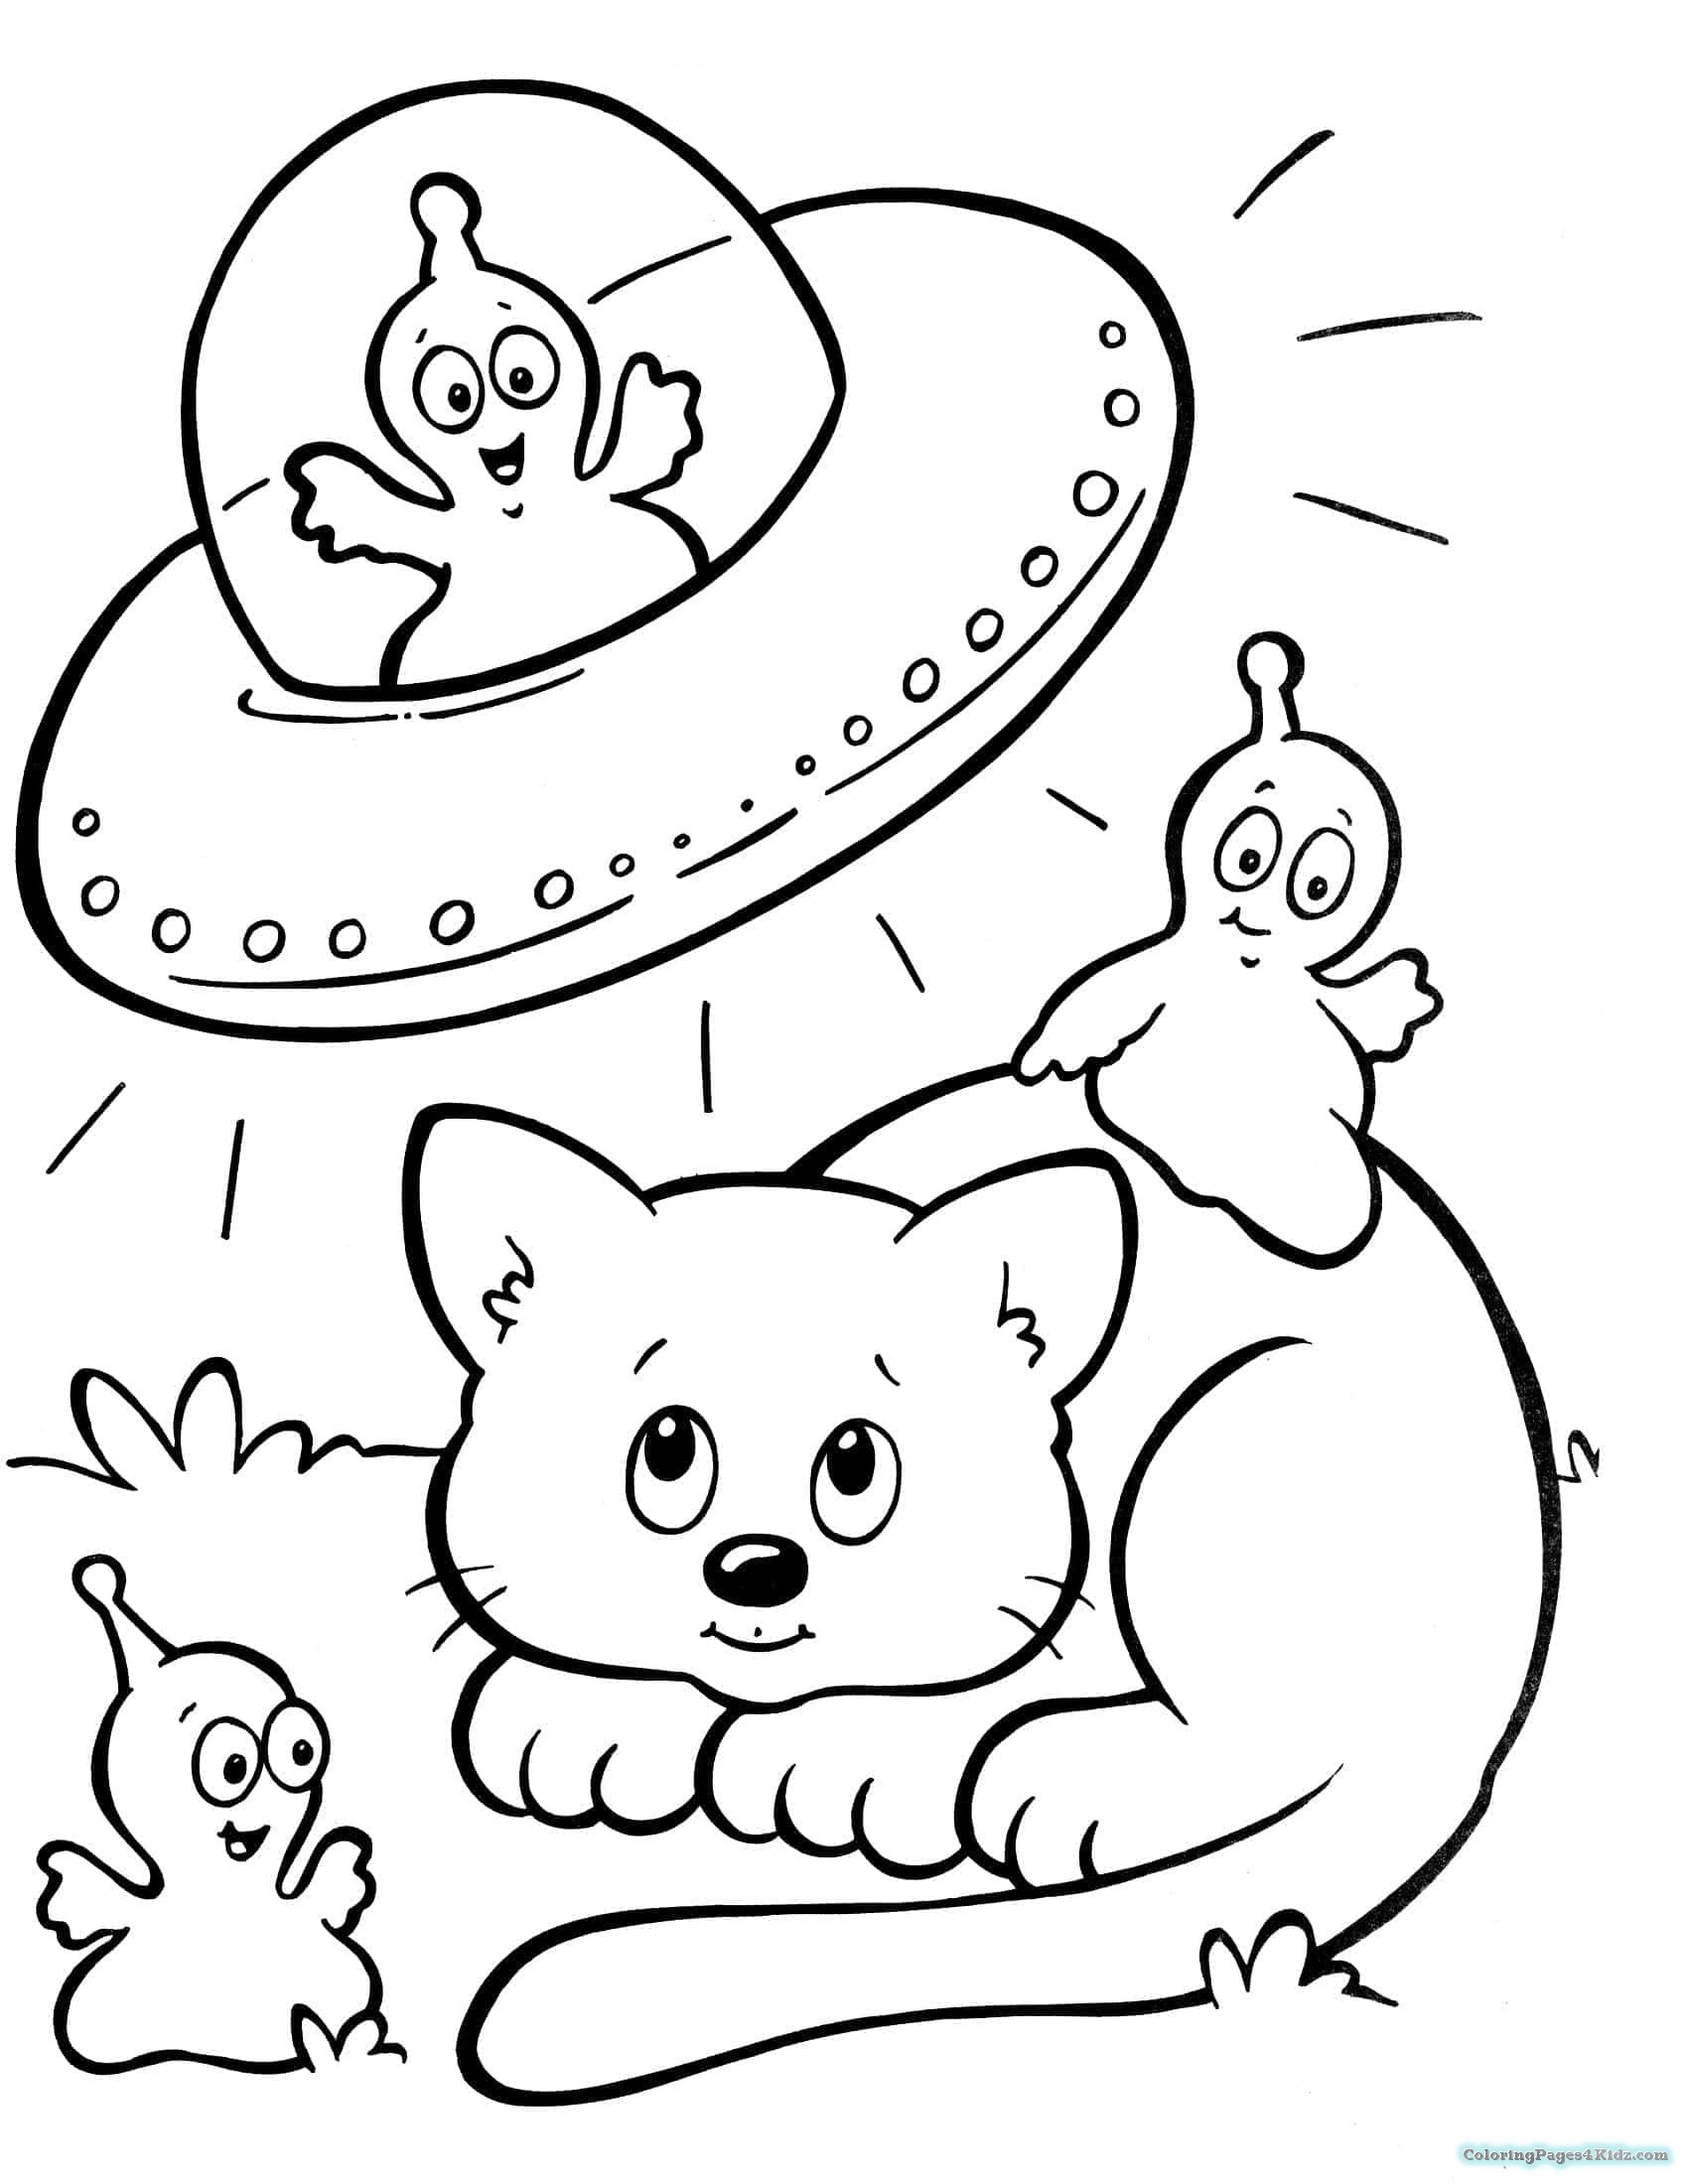 Turn Photo Into Coloring Page Free at